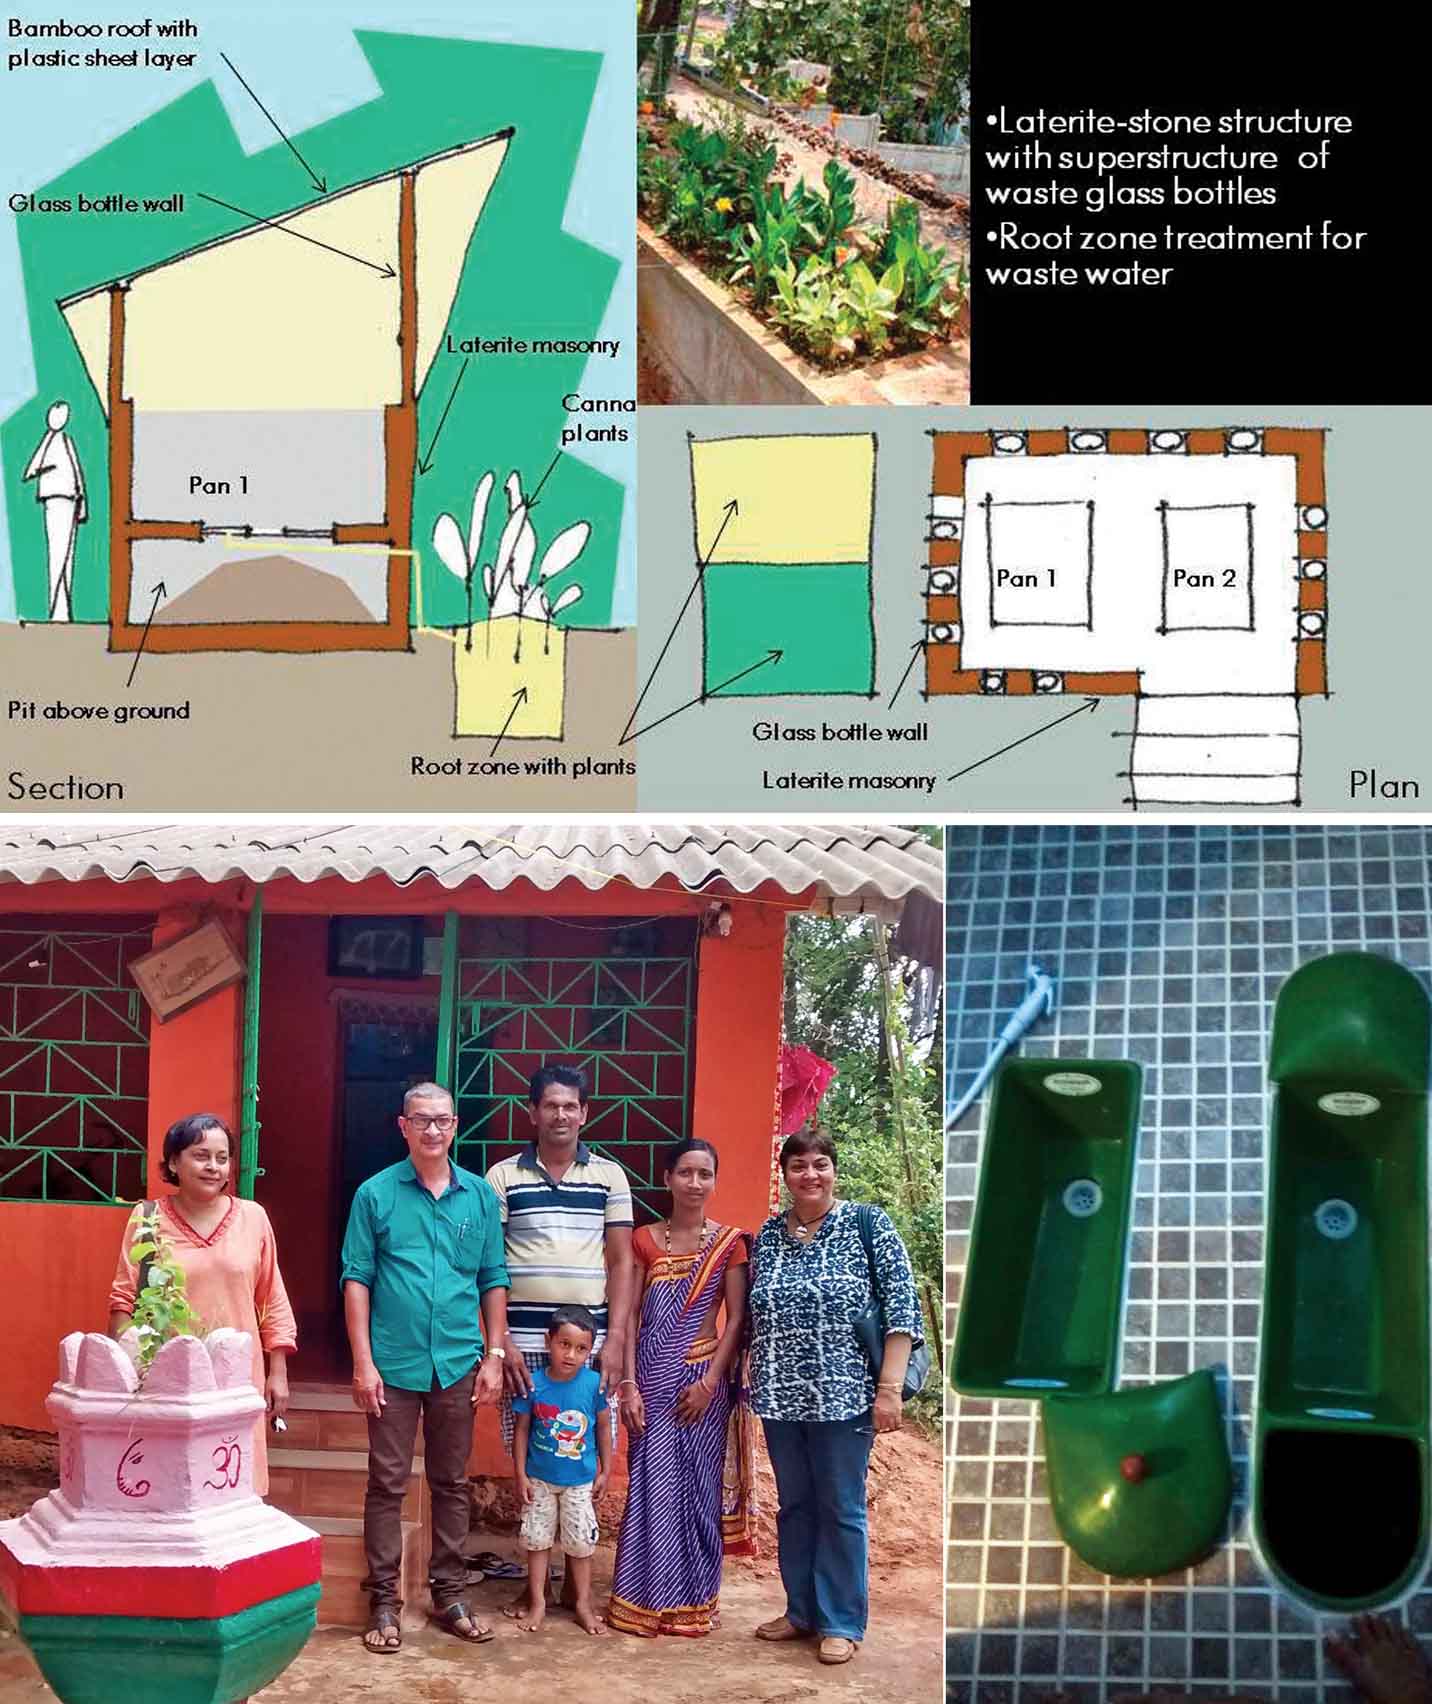 ecoloo-experimenting-with-dry-toilets-rural-goa-root-zone-systems-zero-pollution-models-converting-waste-into-sources-carambolim-residents-pravin-roopa-proud-own-dry-toilet-thanks-fundacao-orient-mitsuko-trust-village-panchayat